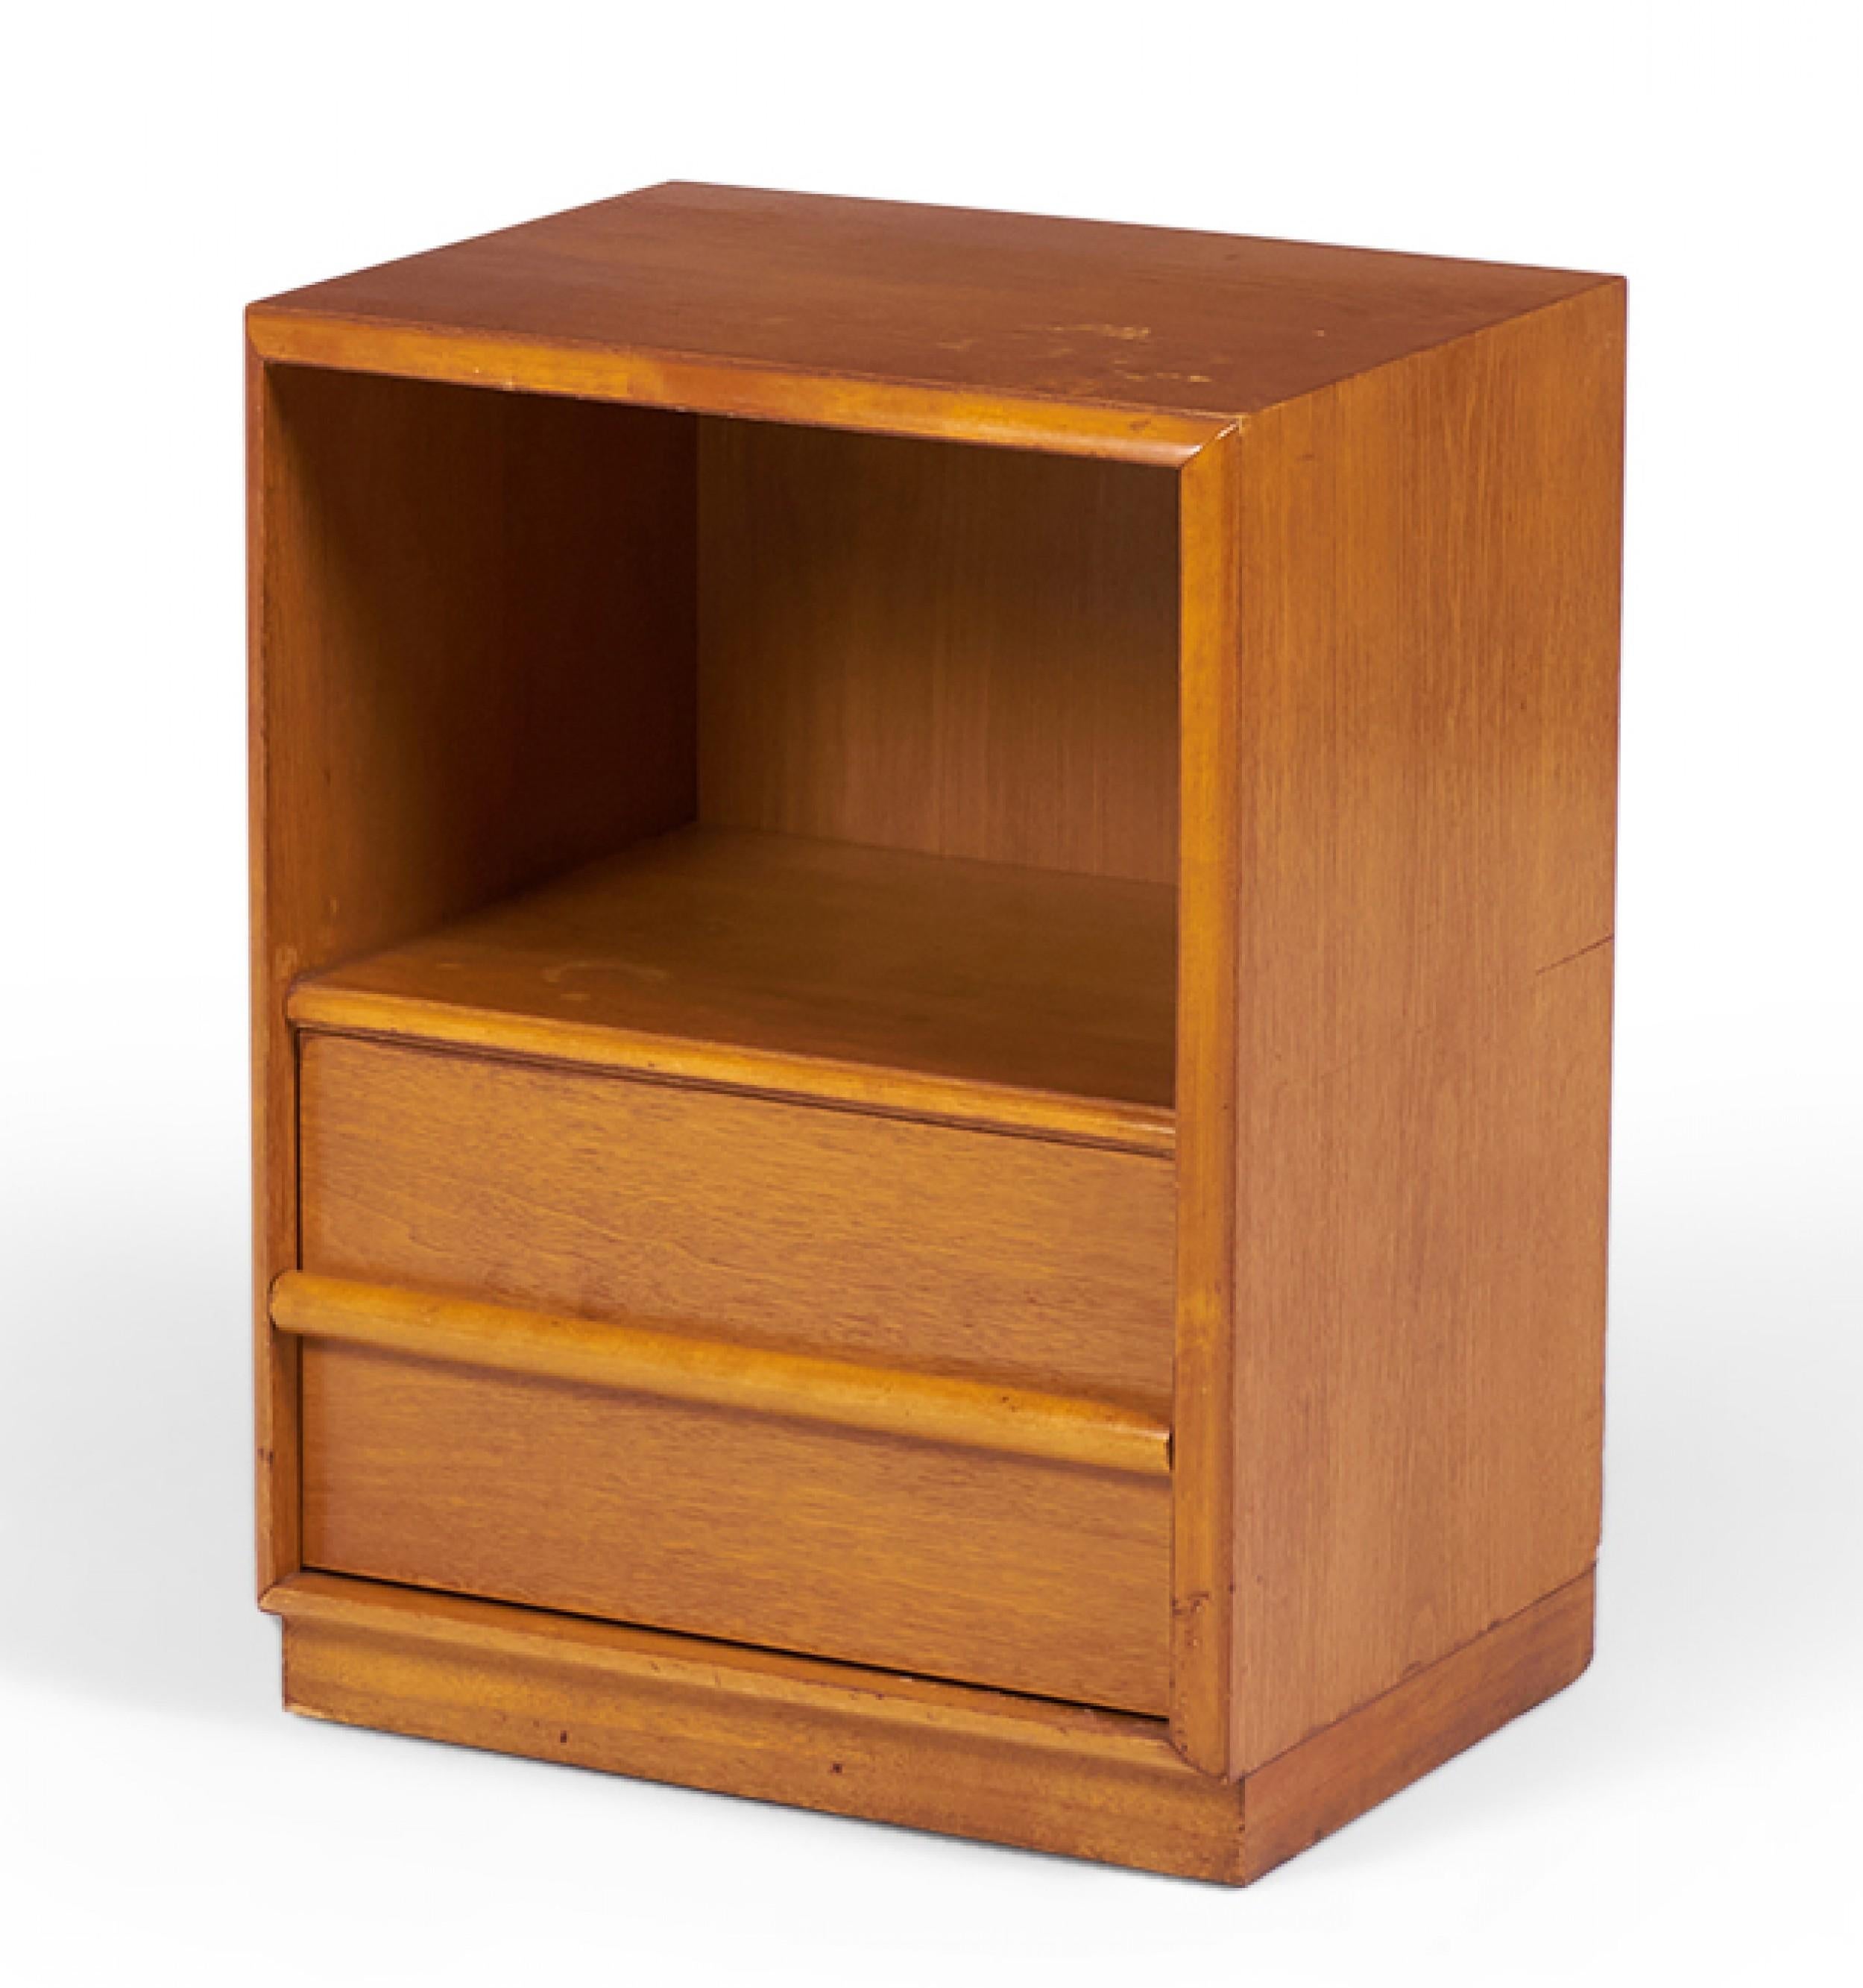 American Mid-Century walnut nightstand with an open upper cabinet shelf and a single lower drawer with a horizontal raised wooden drawer pull. (T.H. ROBSJOHN-GIBBINGS FOR WIDDICOMB)(Same piece with different finish: DUF0143A&C).